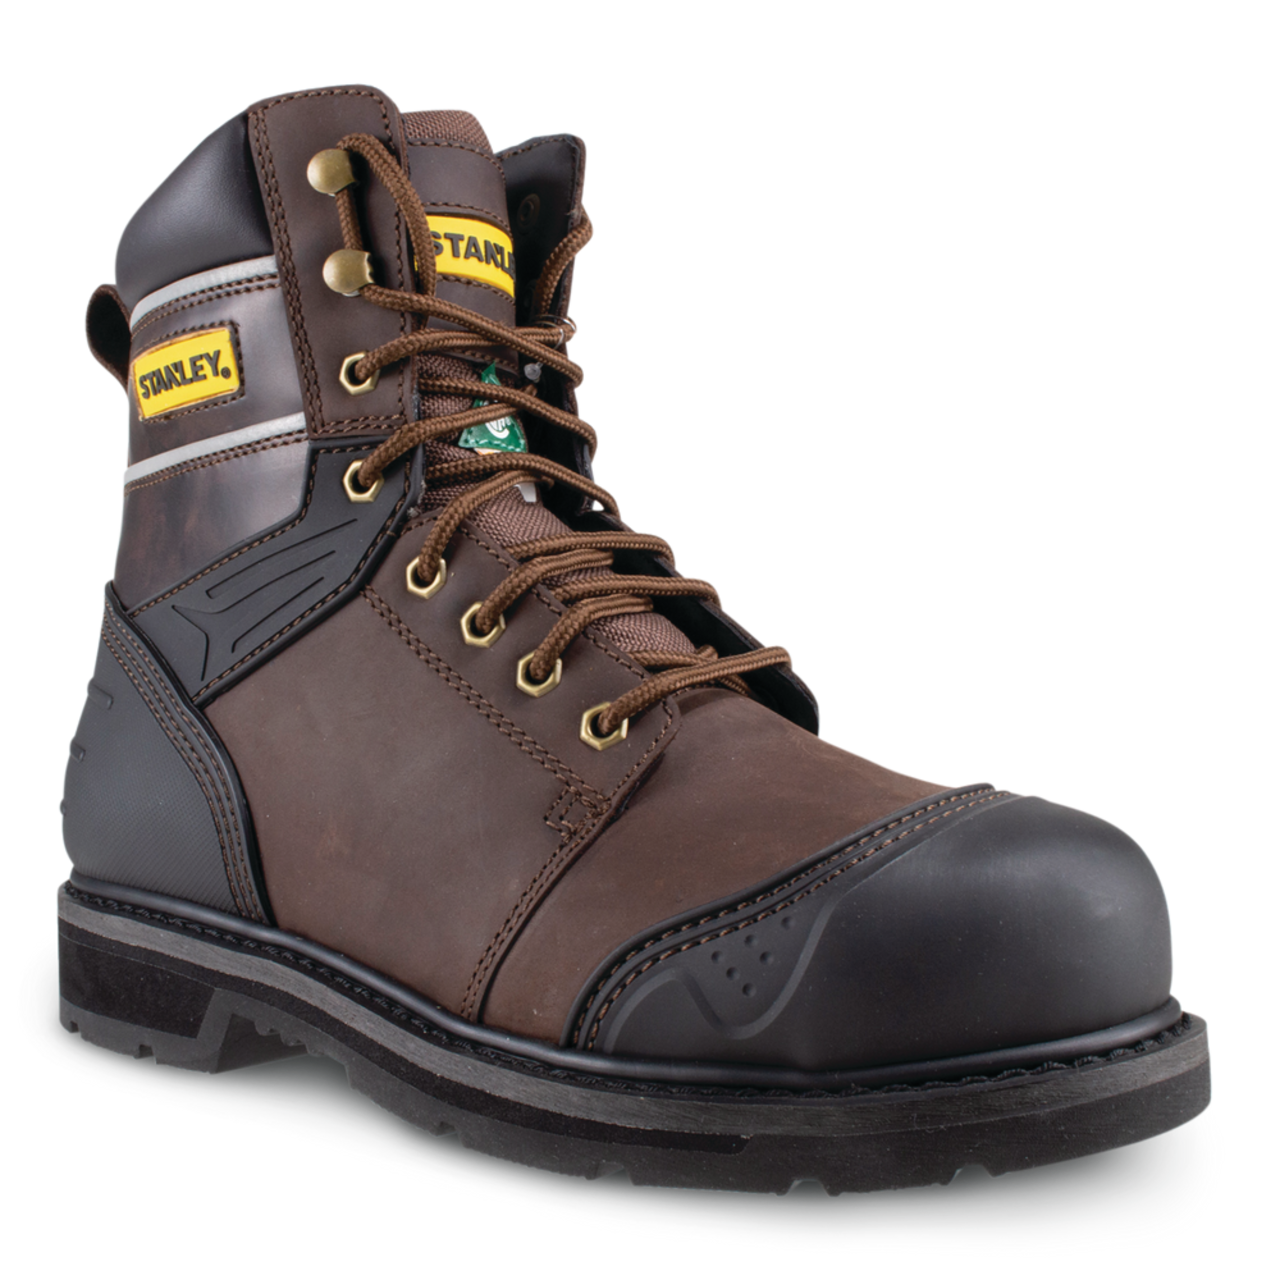 STANLEY Men's CSA 8 Work Boots - Eastern Mountain Sports